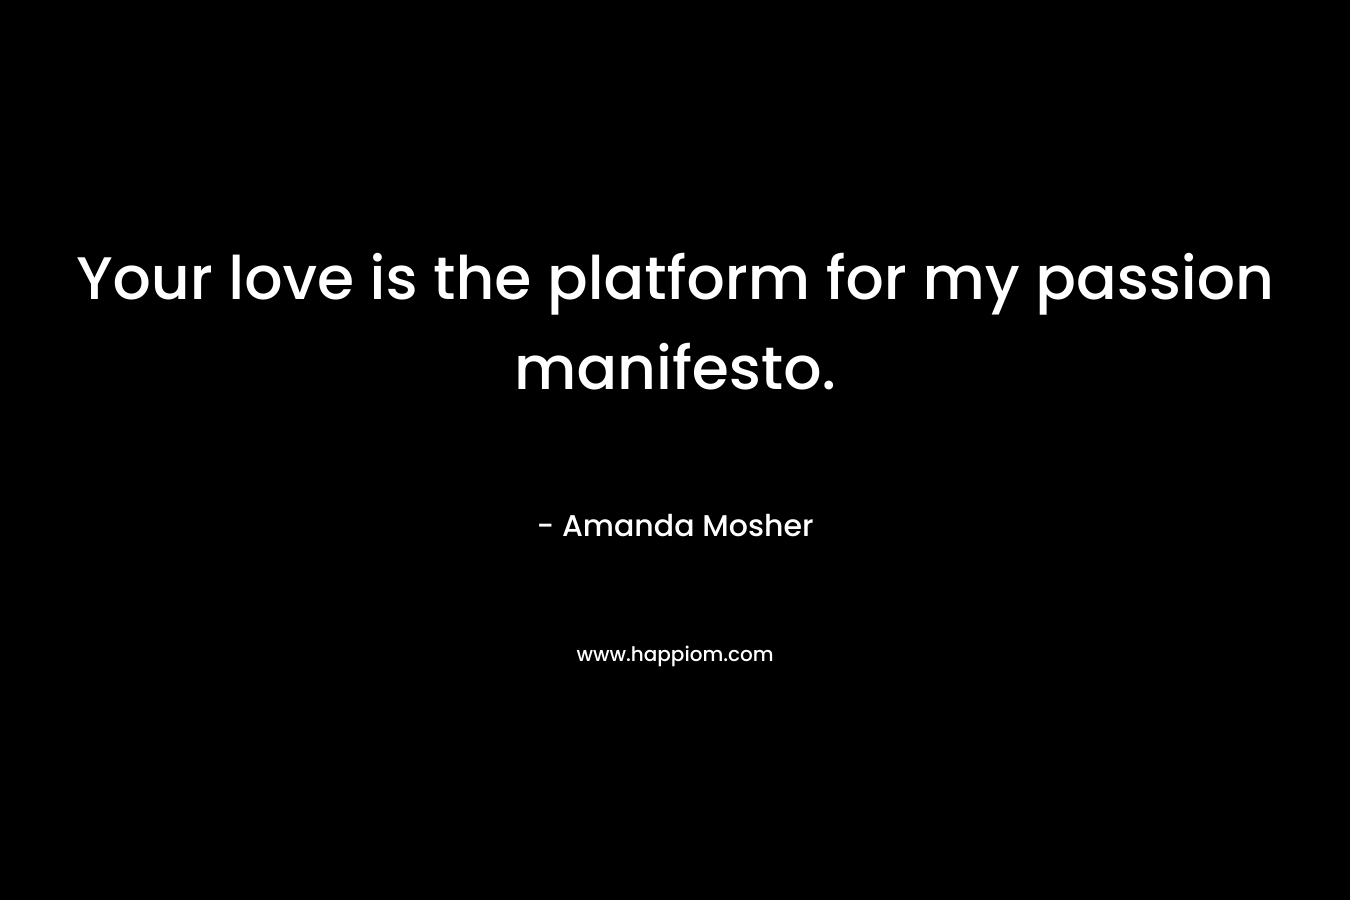 Your love is the platform for my passion manifesto.